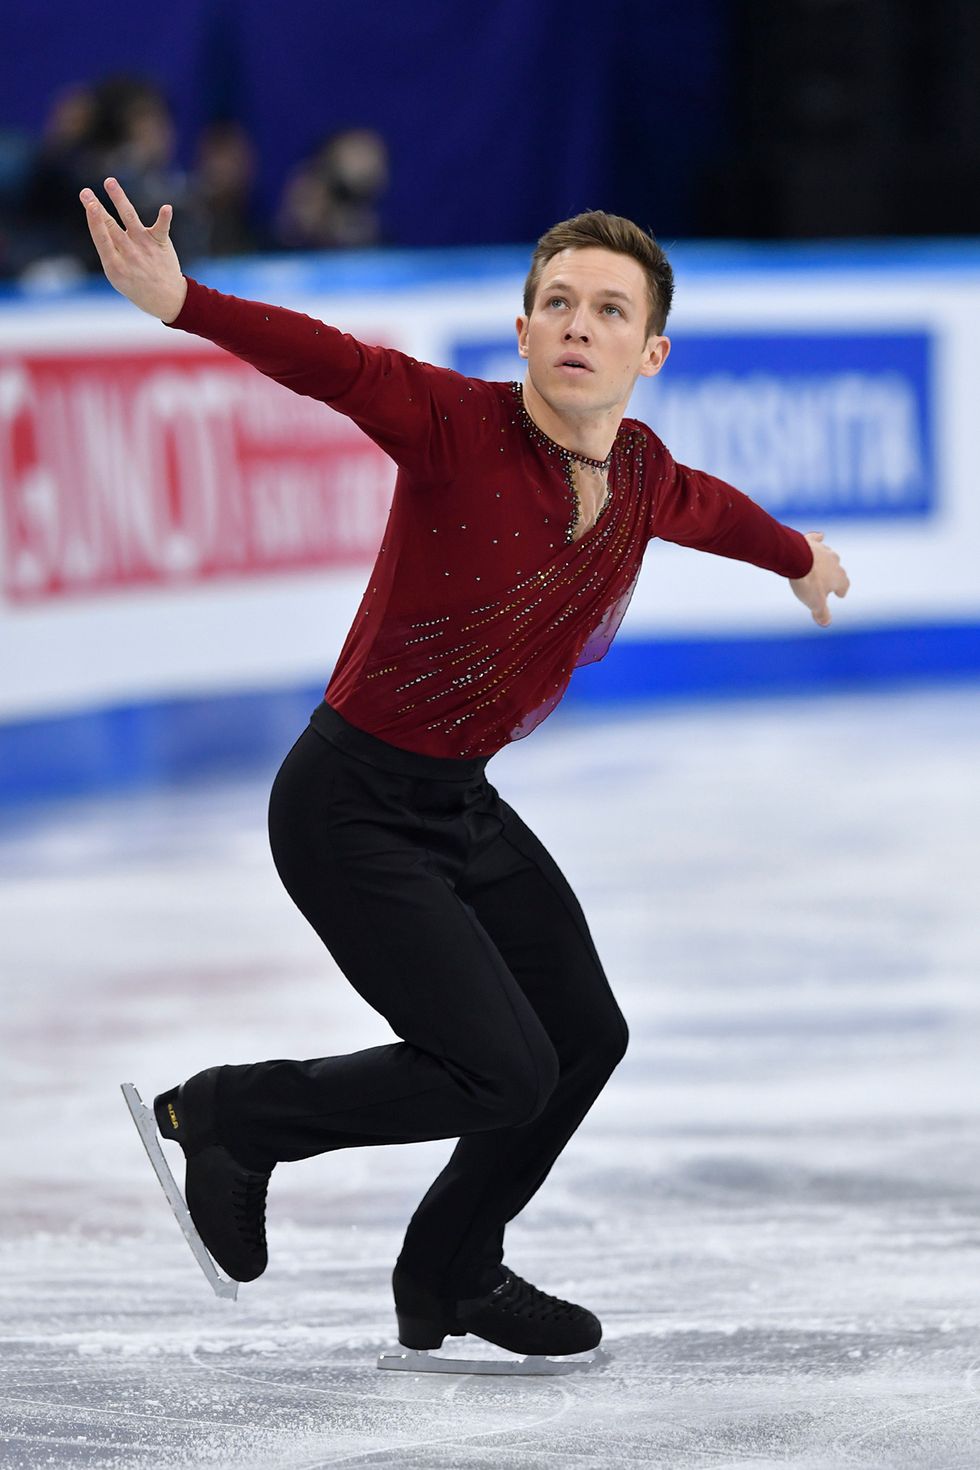 Ice skate, Joint, Knee, Ice rink, Figure skate, Youth, World, Figure skating, Championship, Individual sports, 